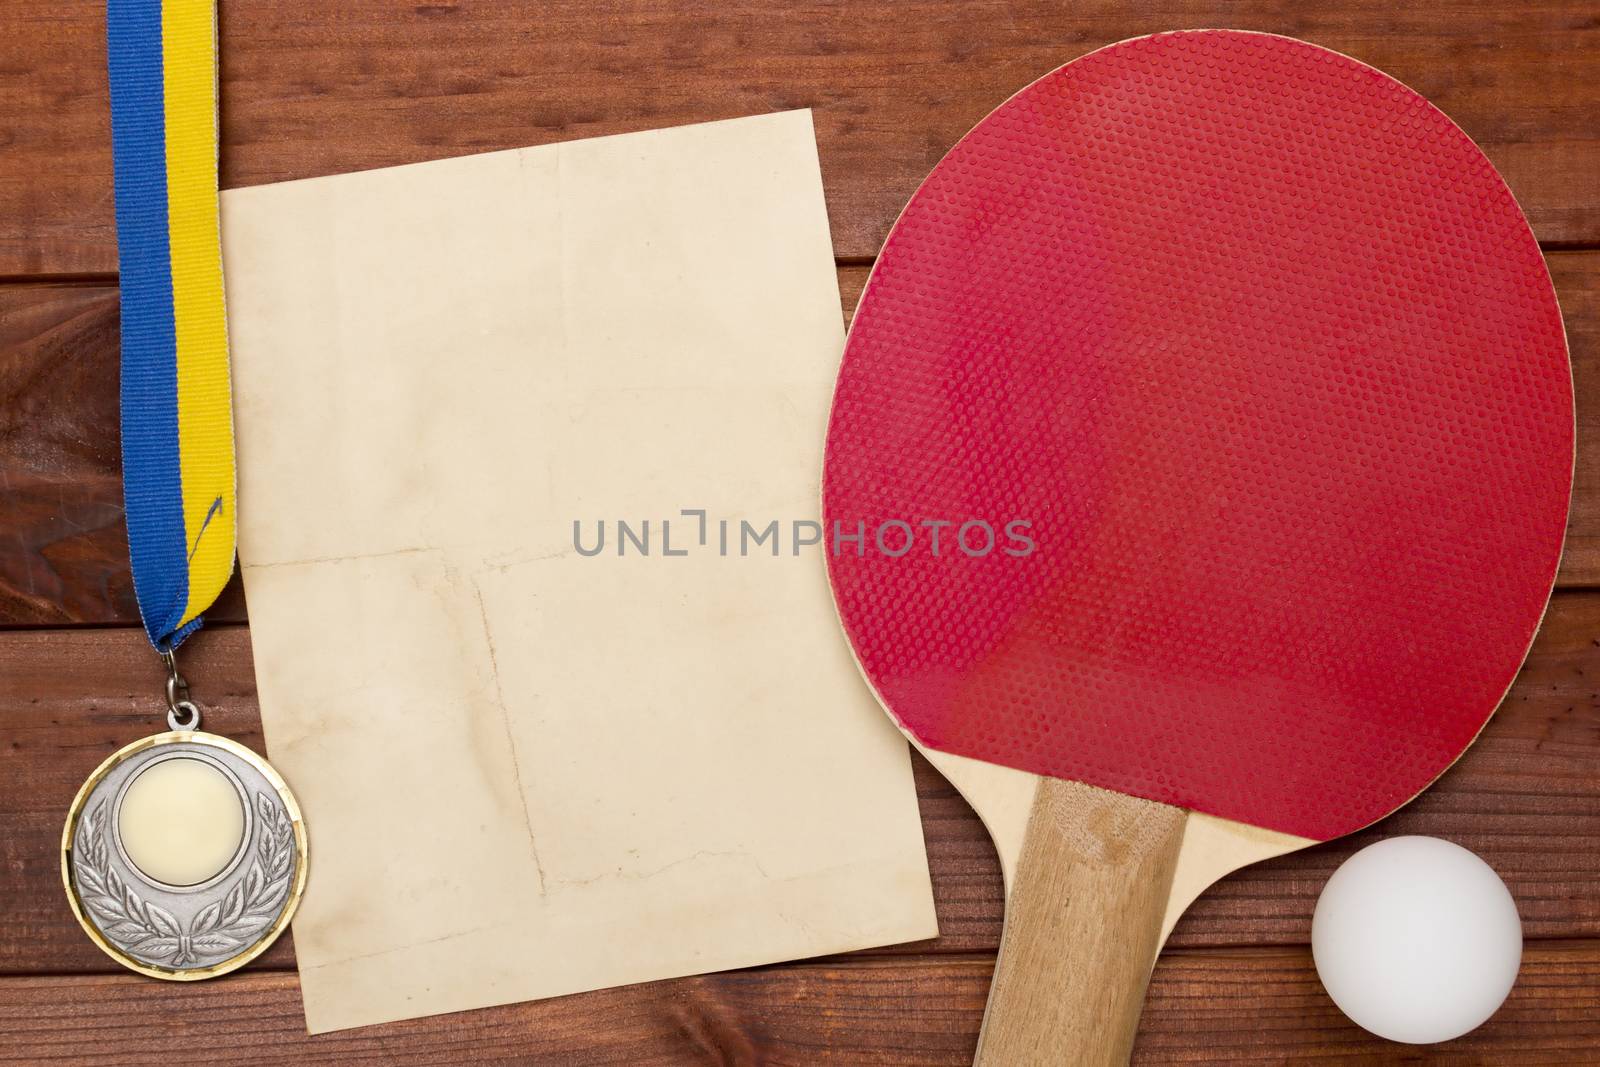 Creative on the topic of table tennis. Racket and accessories for table tennis.